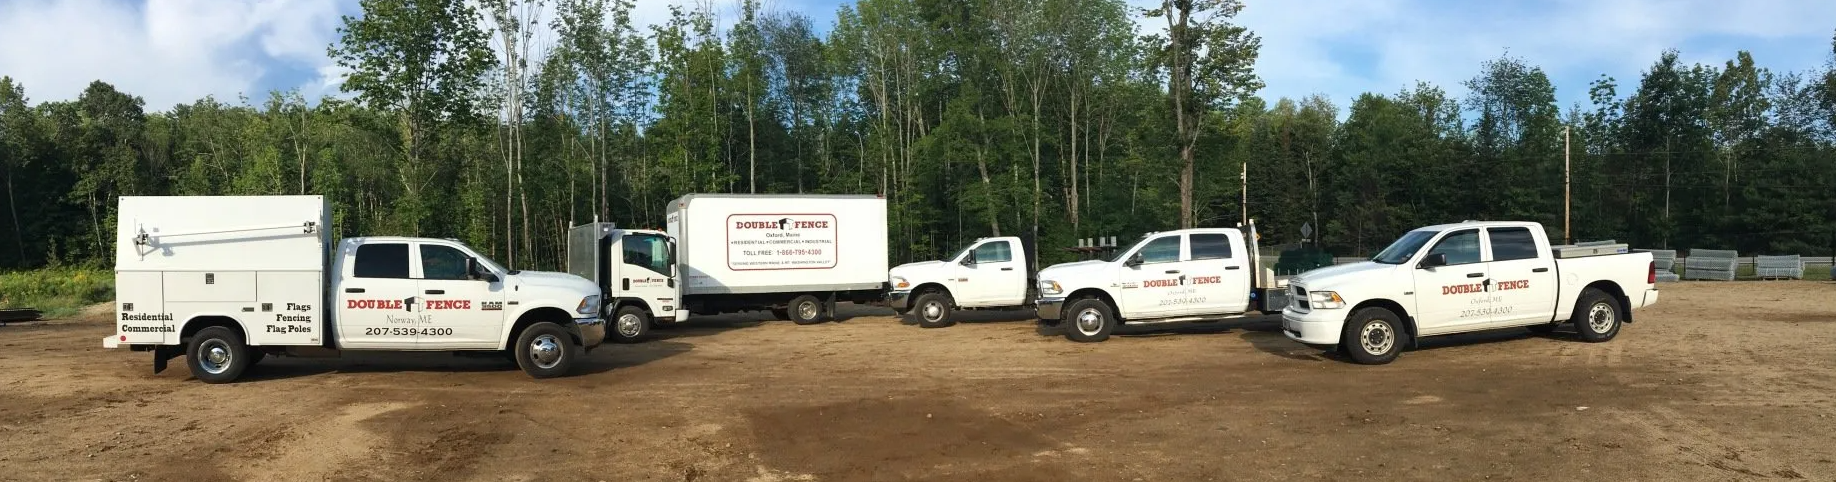 a row of white trucks are parked in a dirt lot .